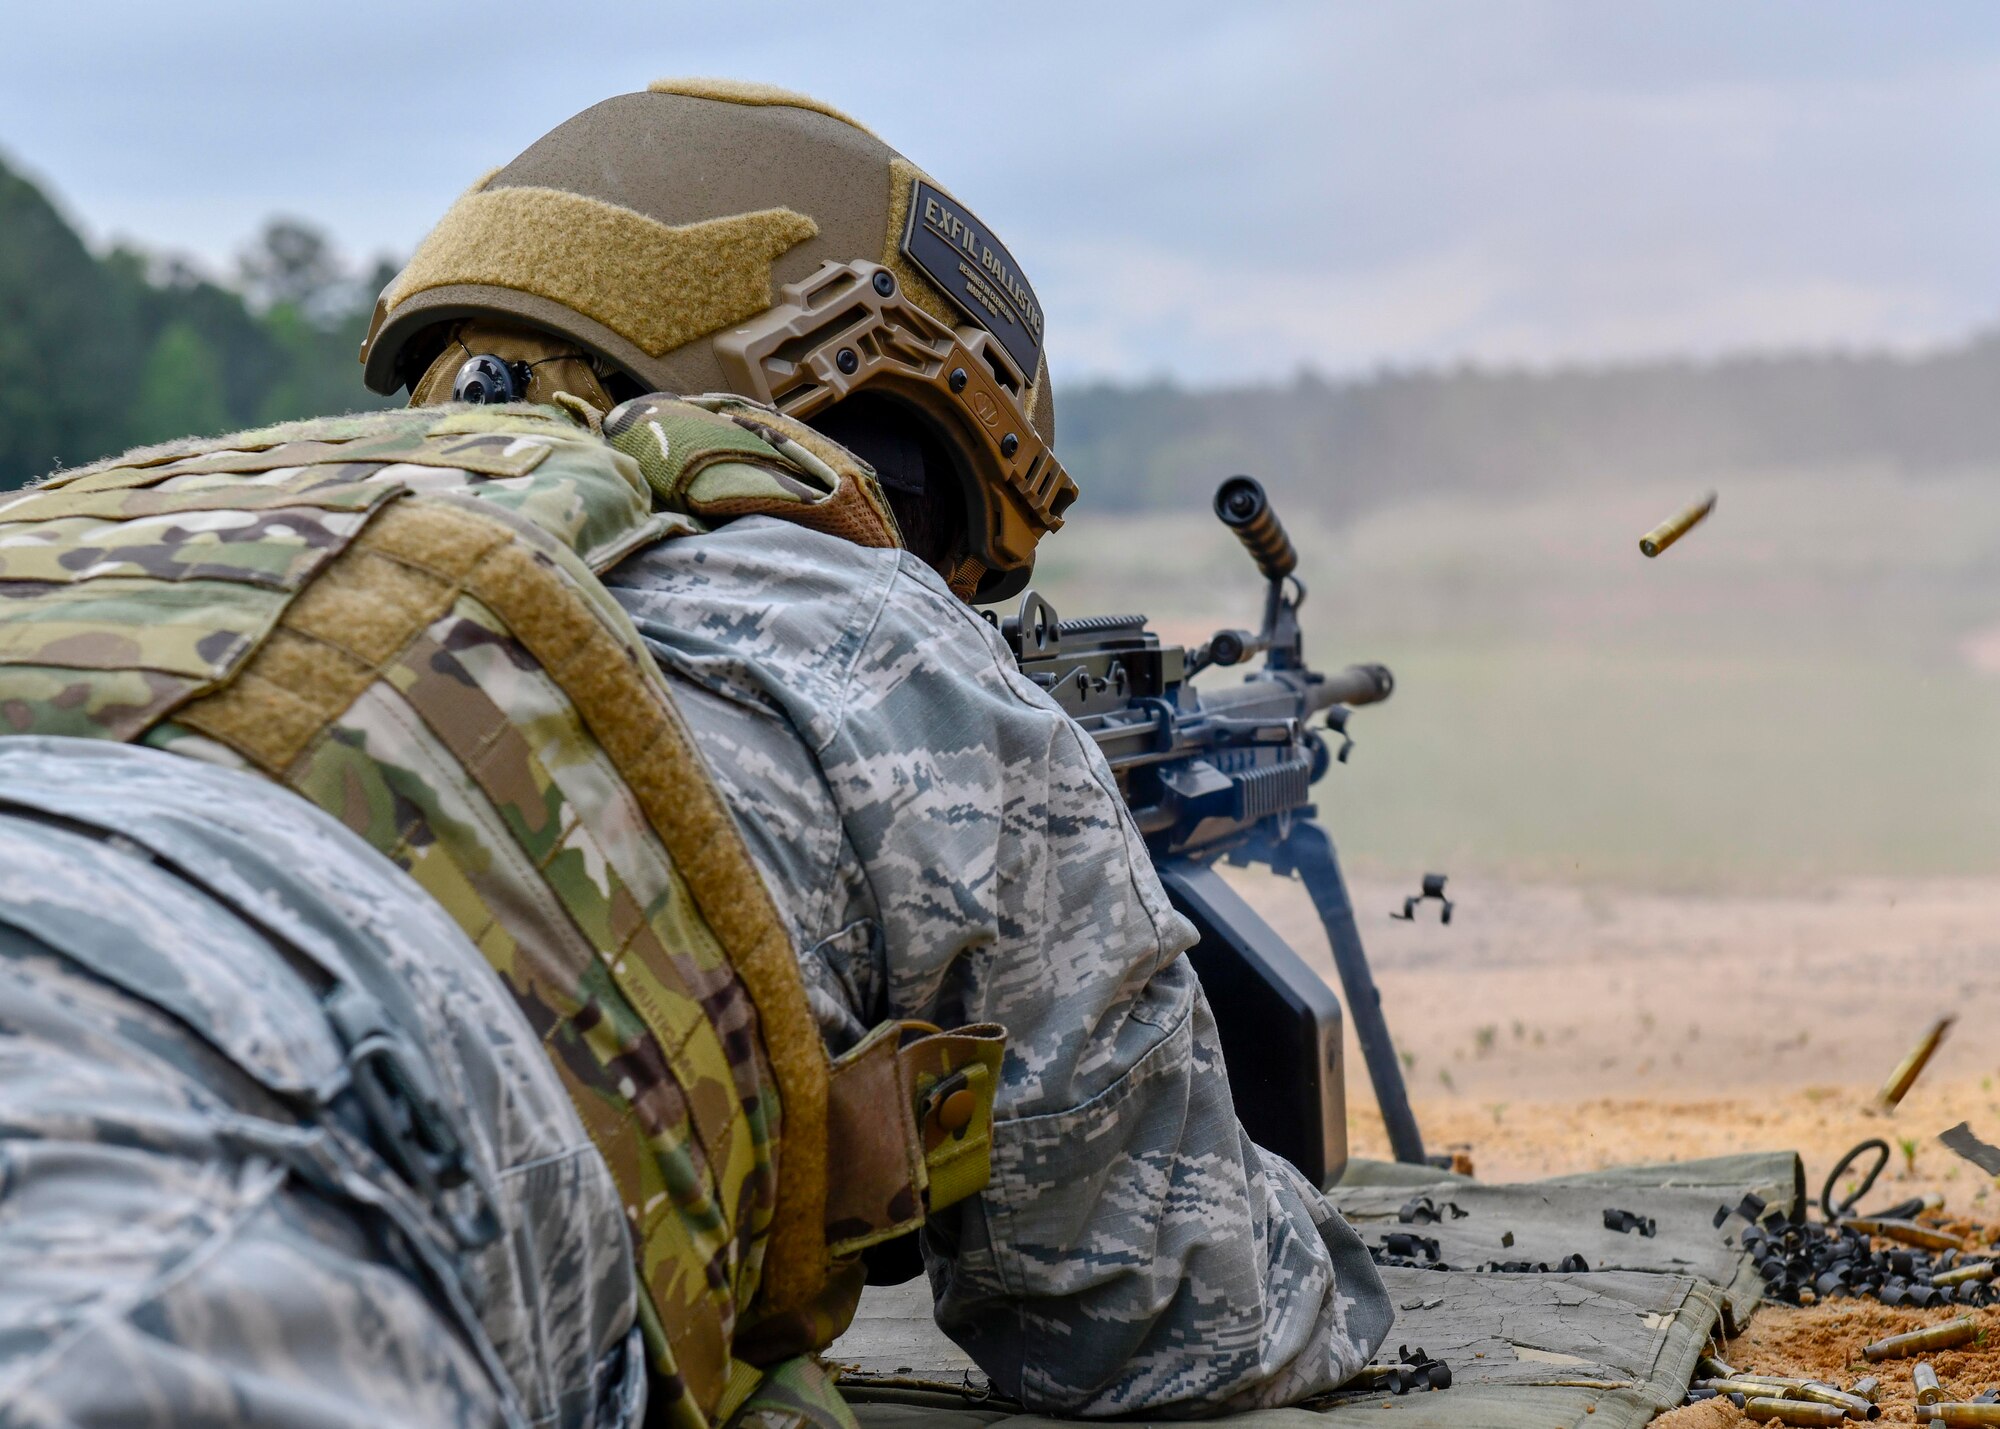 Airman First Class Christopher Eastes, 4th Security Forces Squadron patrolman, fires an M249 light machine gun at Fort Bragg, North Carolina, May 6, 2020. The M249 bolt assembly provides stripping, cambering, firing, and extraction, using the propellant gases and recoil spring for power. (U.S. Air Force photo by Airman First Class Kimberly Barrera)